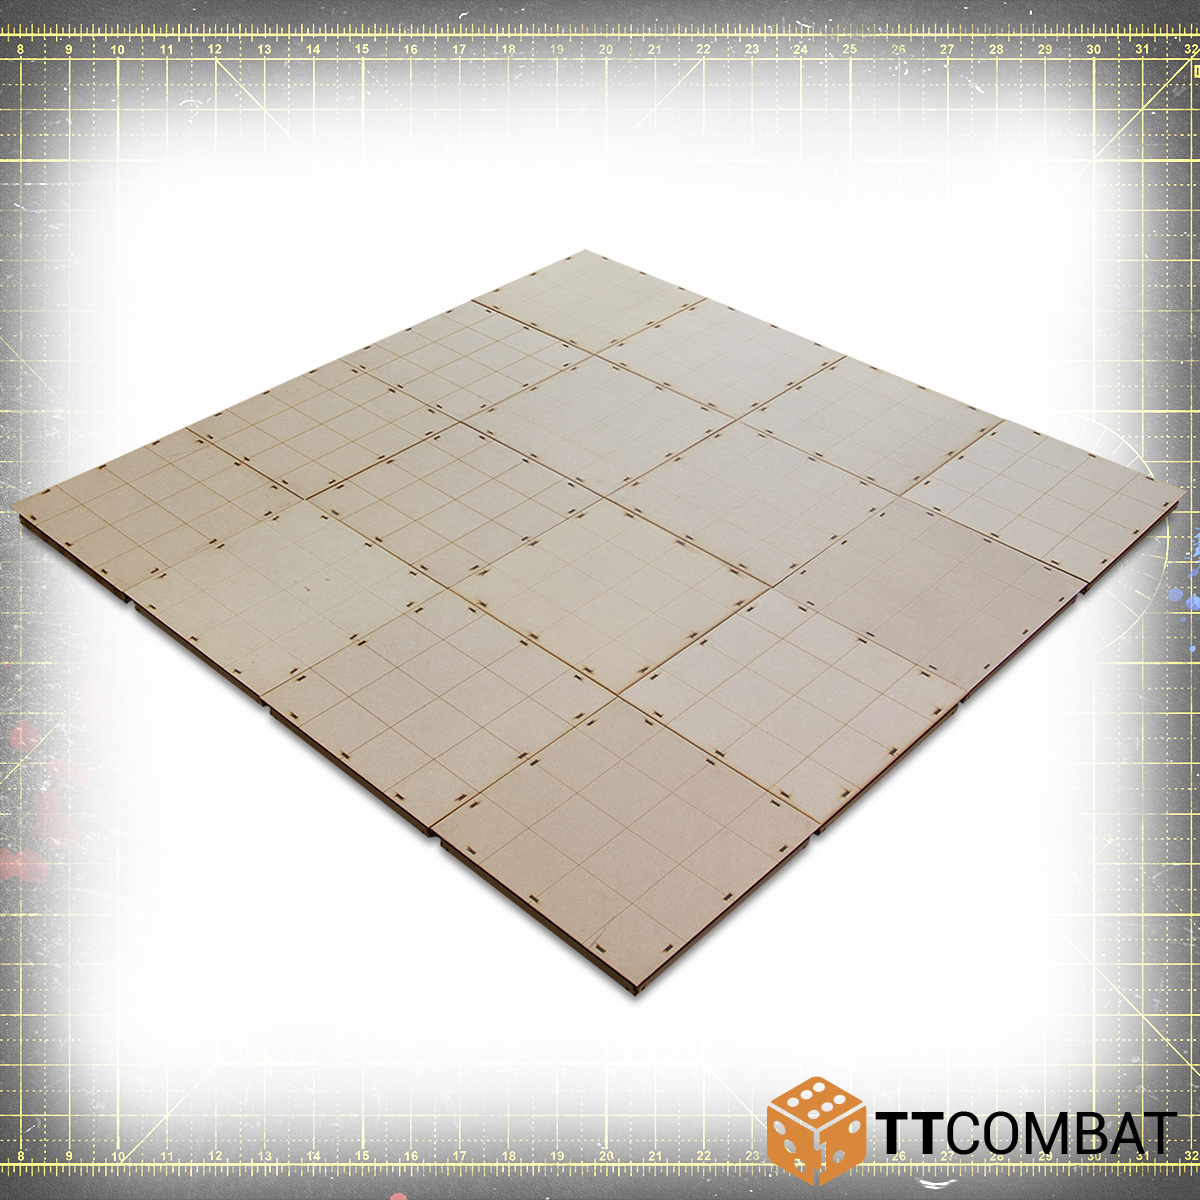 Game Mats & Boards